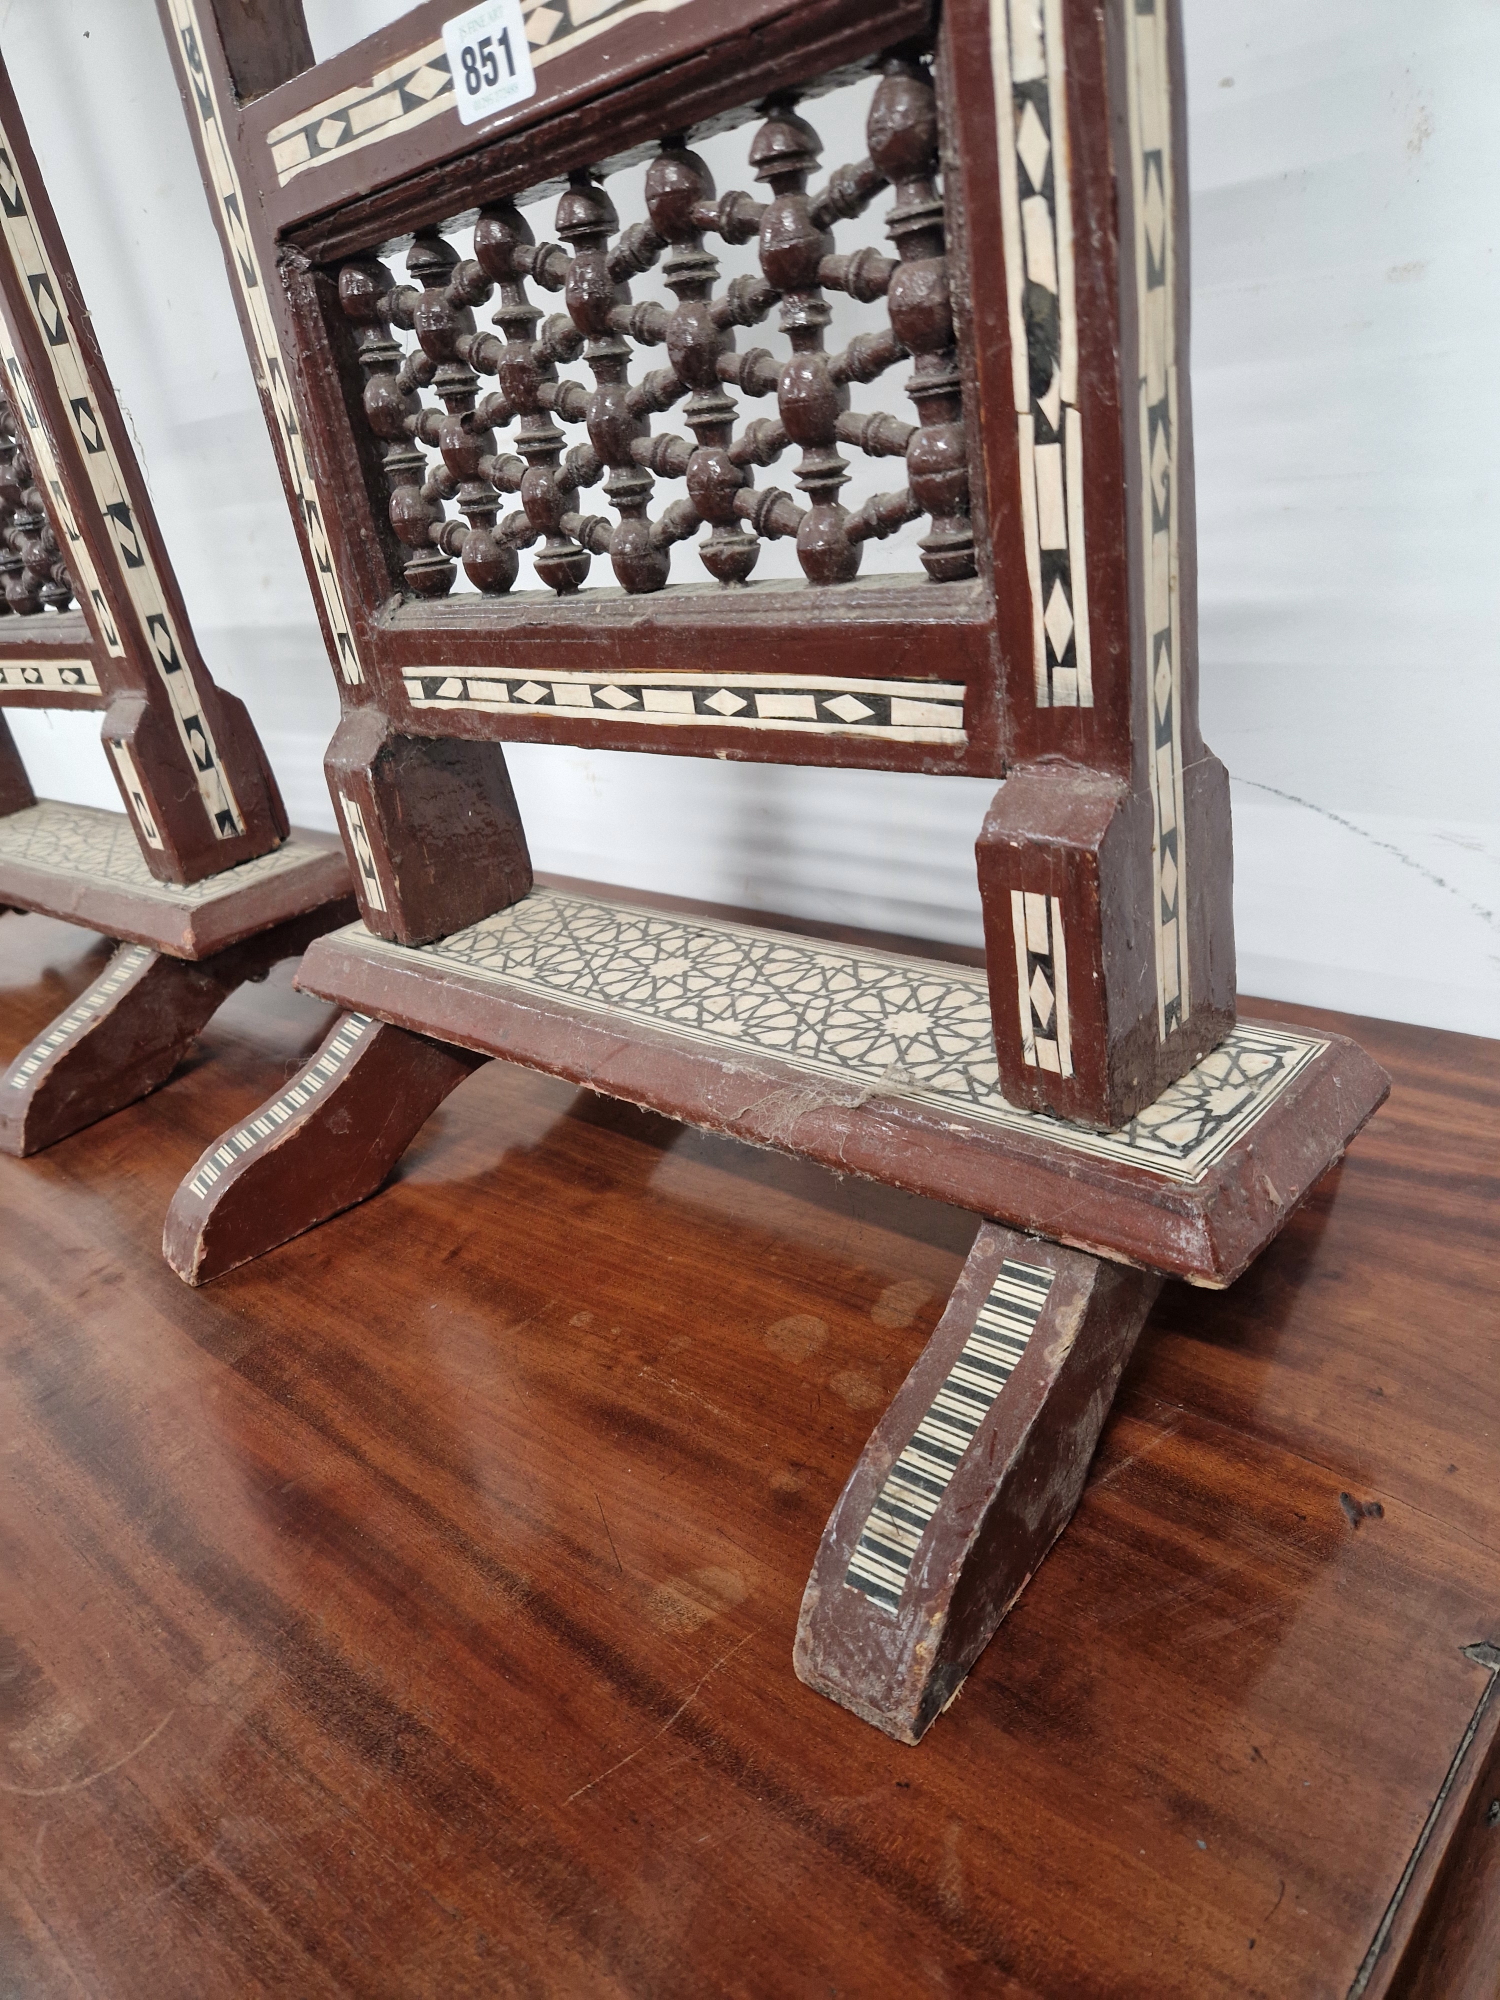 A PAIR OF ISLAMIC FOLDING OCTAGONAL TABLES GEOMETRICALLY INLAID IN MOTHER OF PEARL AND EBONY - Image 3 of 13